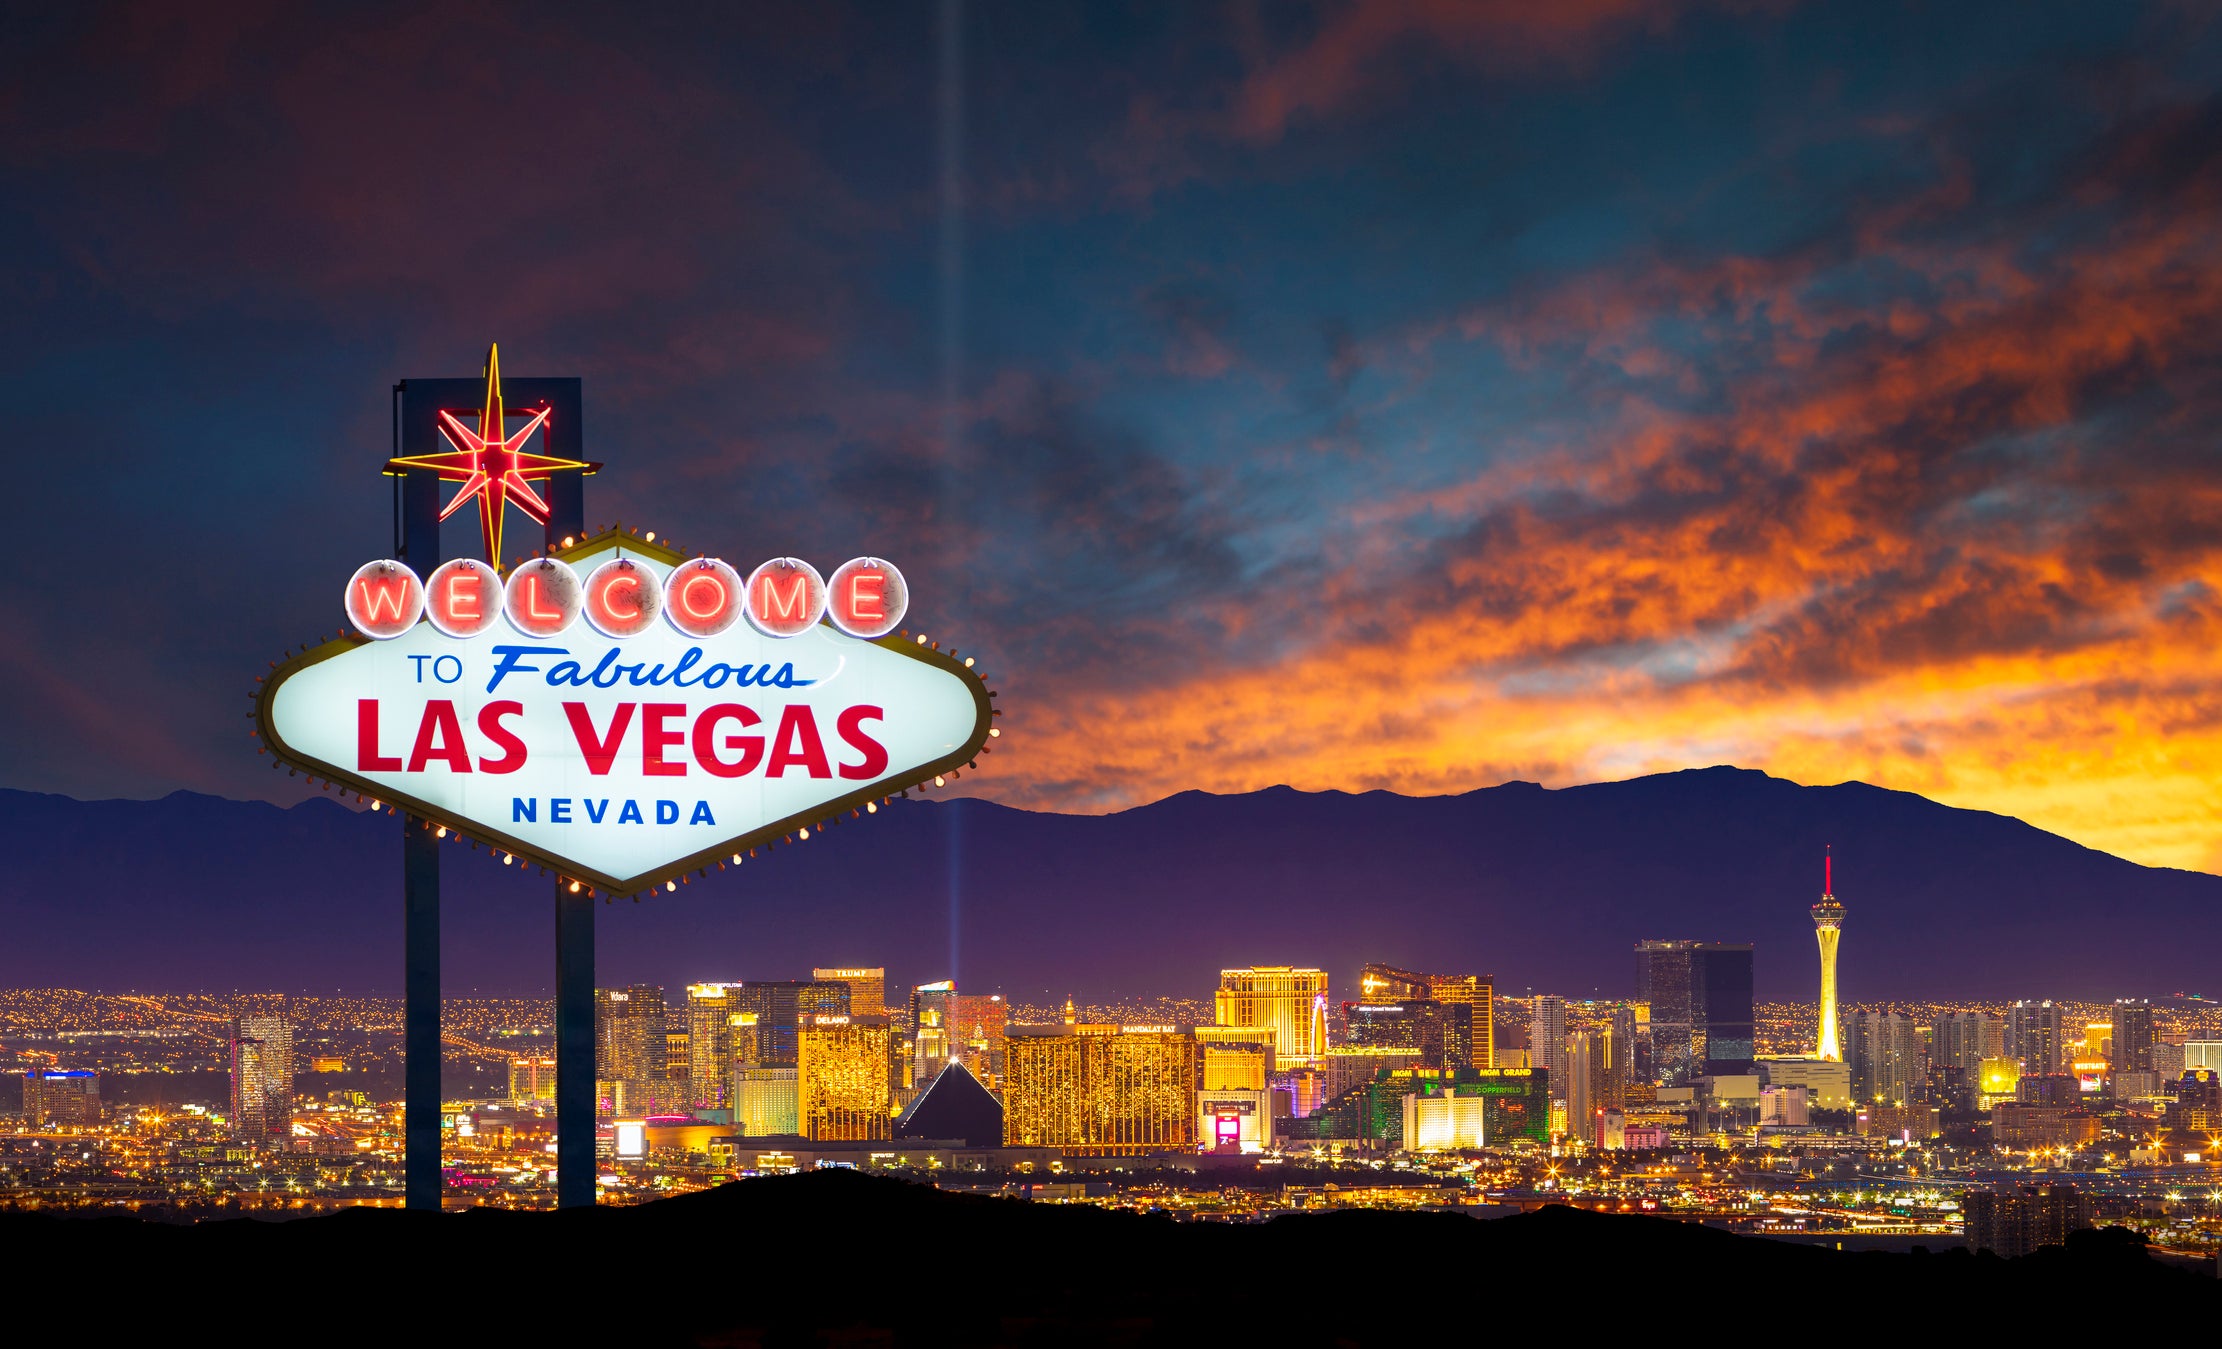 Find 10 per cent off Vegas tours with AttractionTickets.com